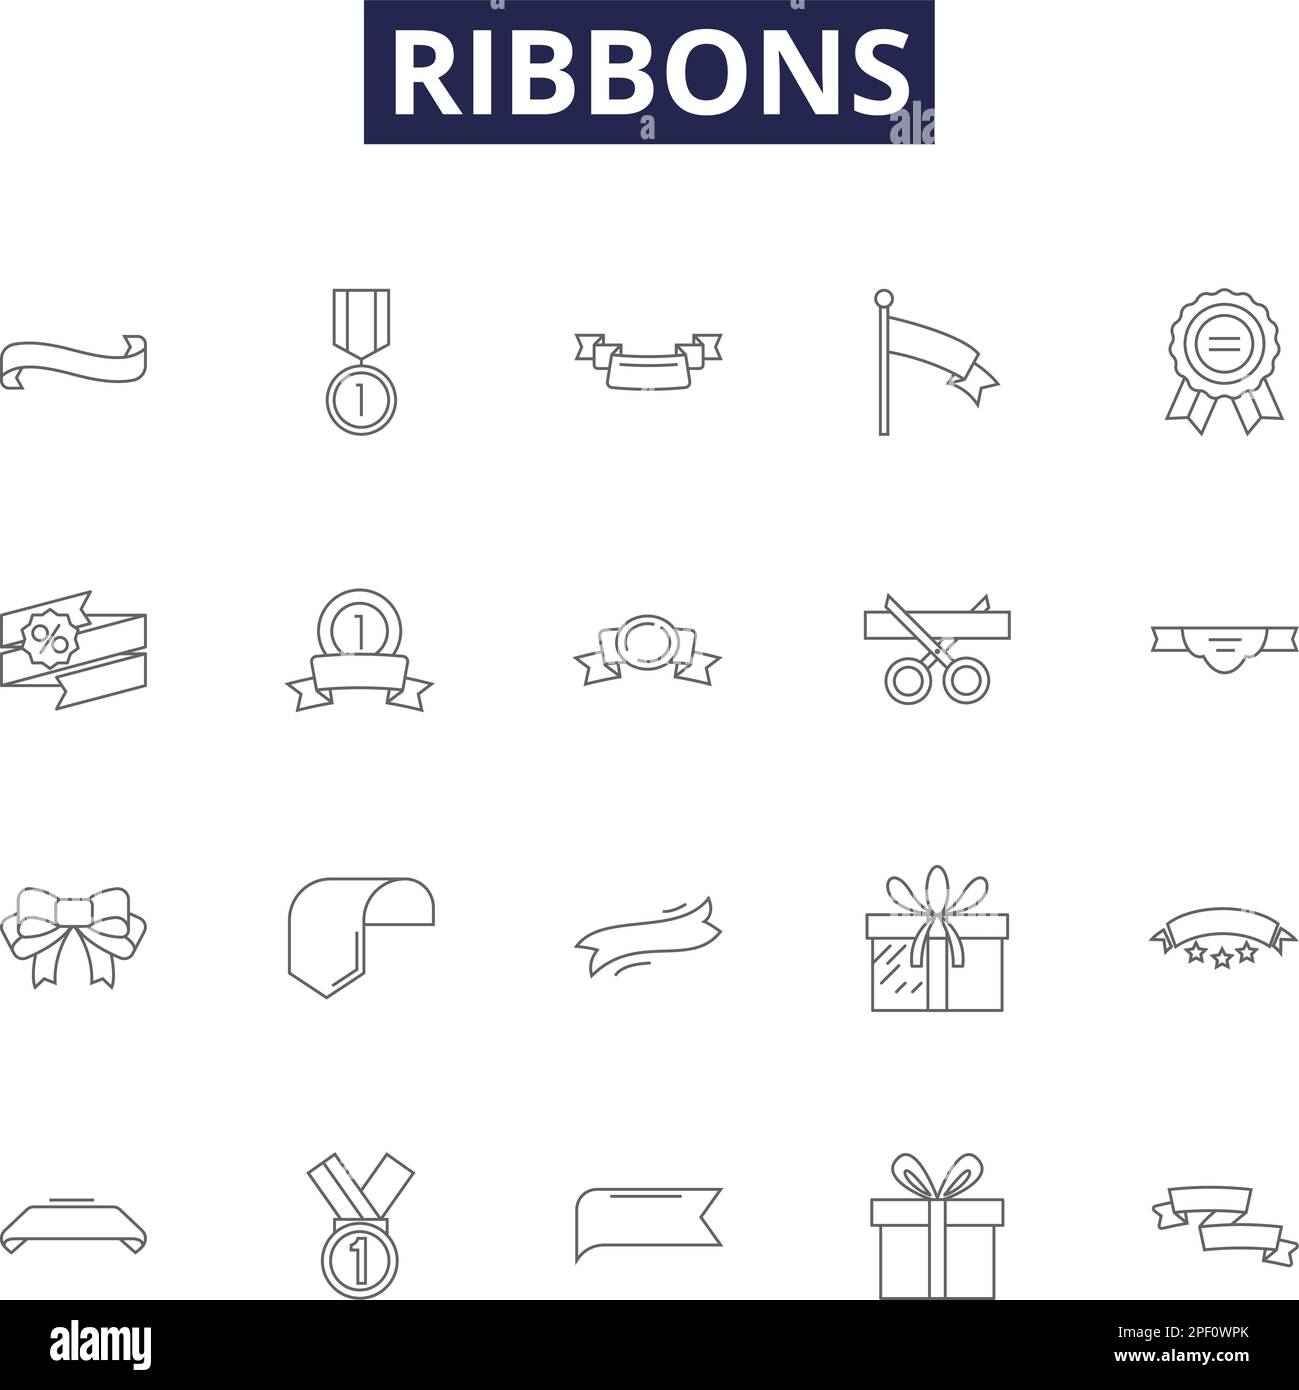 Ribbons line vector icons and signs. Grosgrain, Satin, Organza, Tulle ...